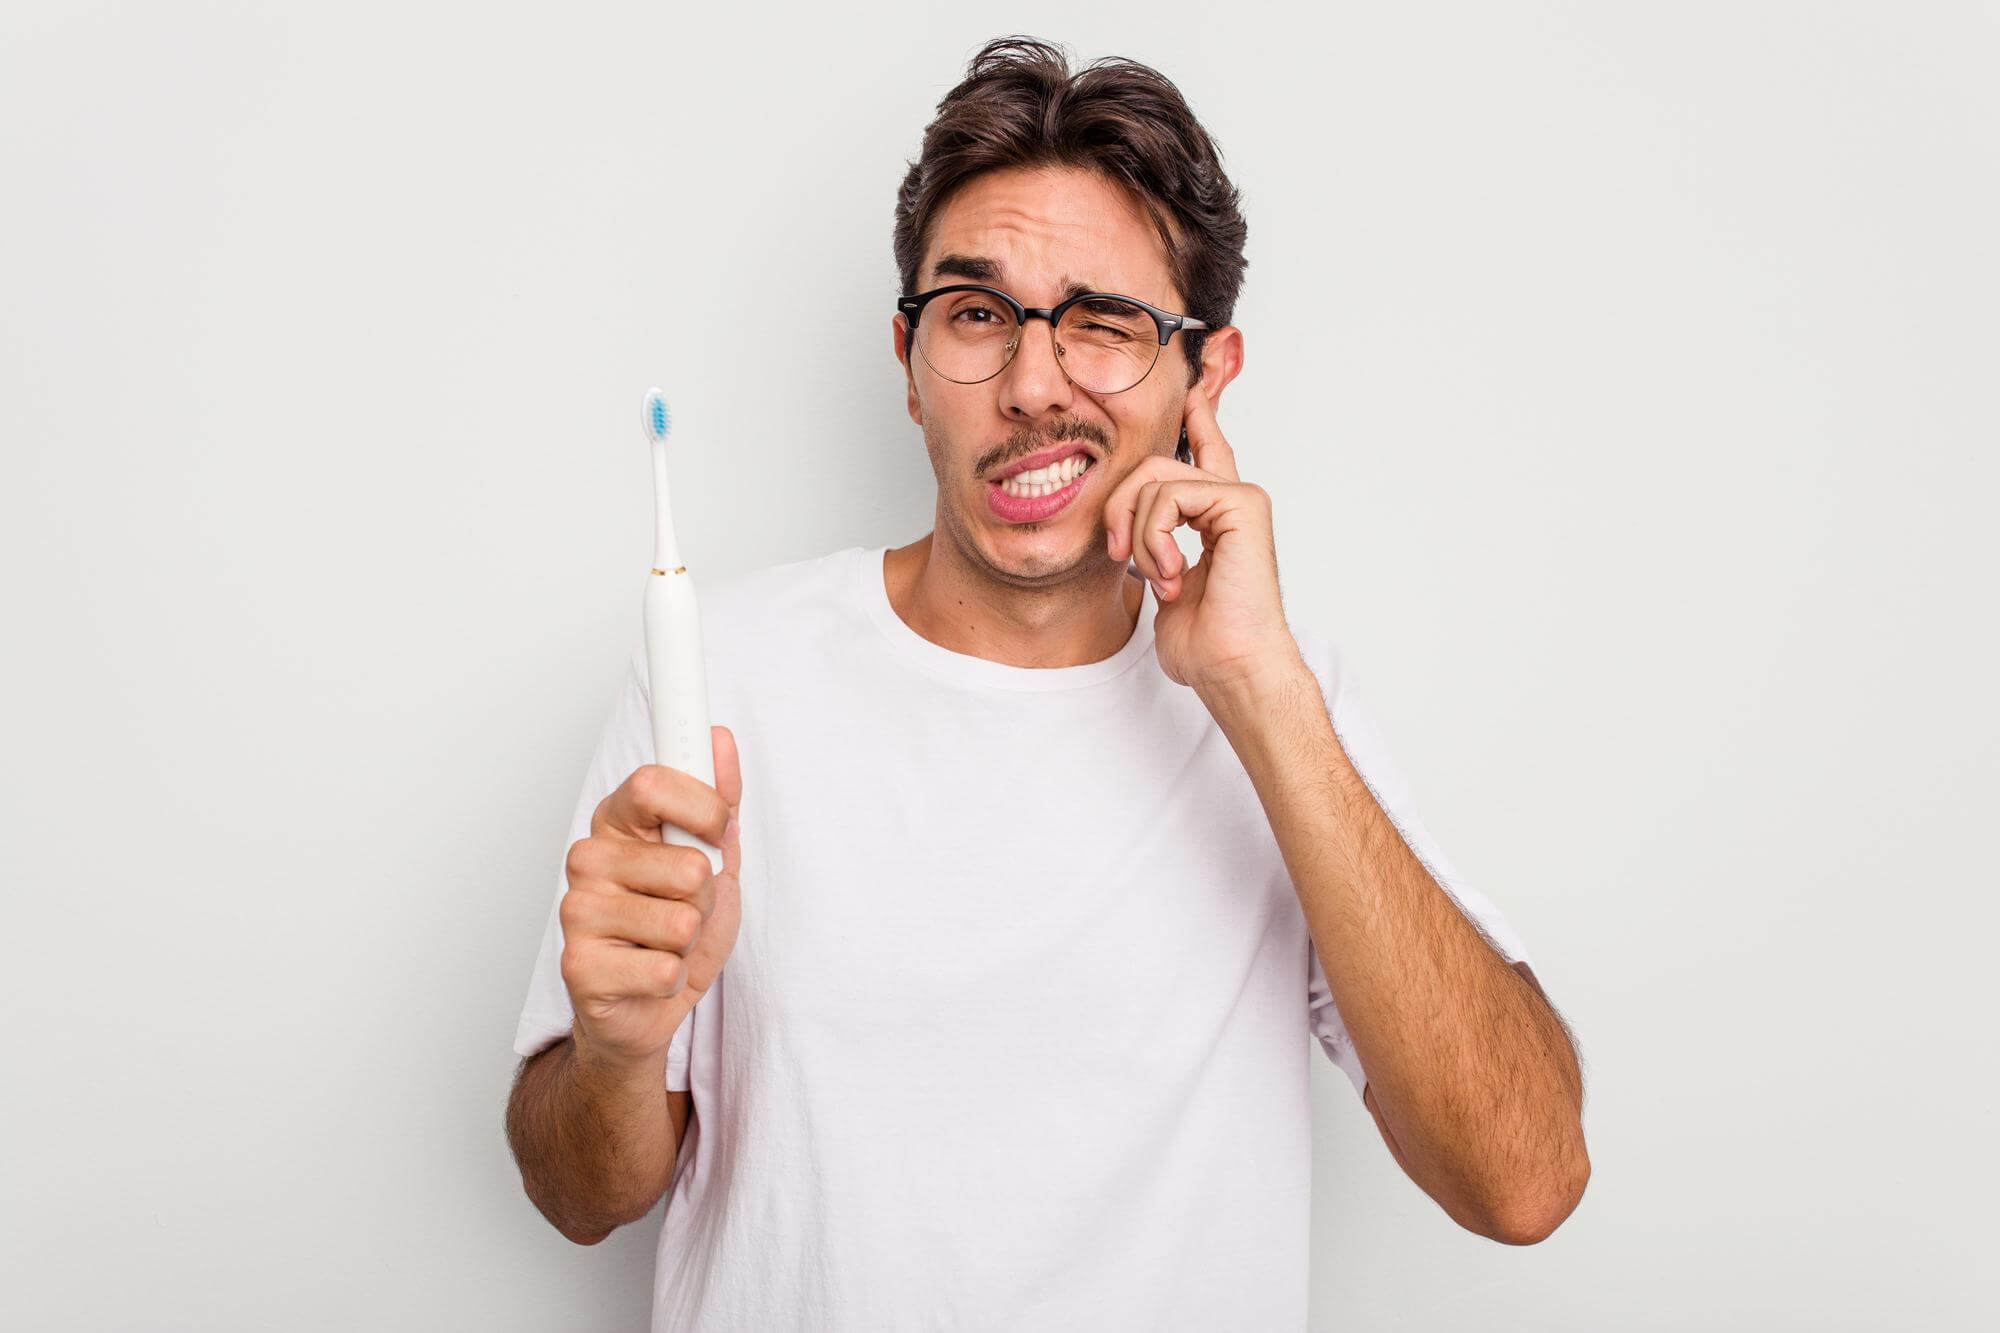 Manual vs Electric Toothbrush: What’s Best For Me?